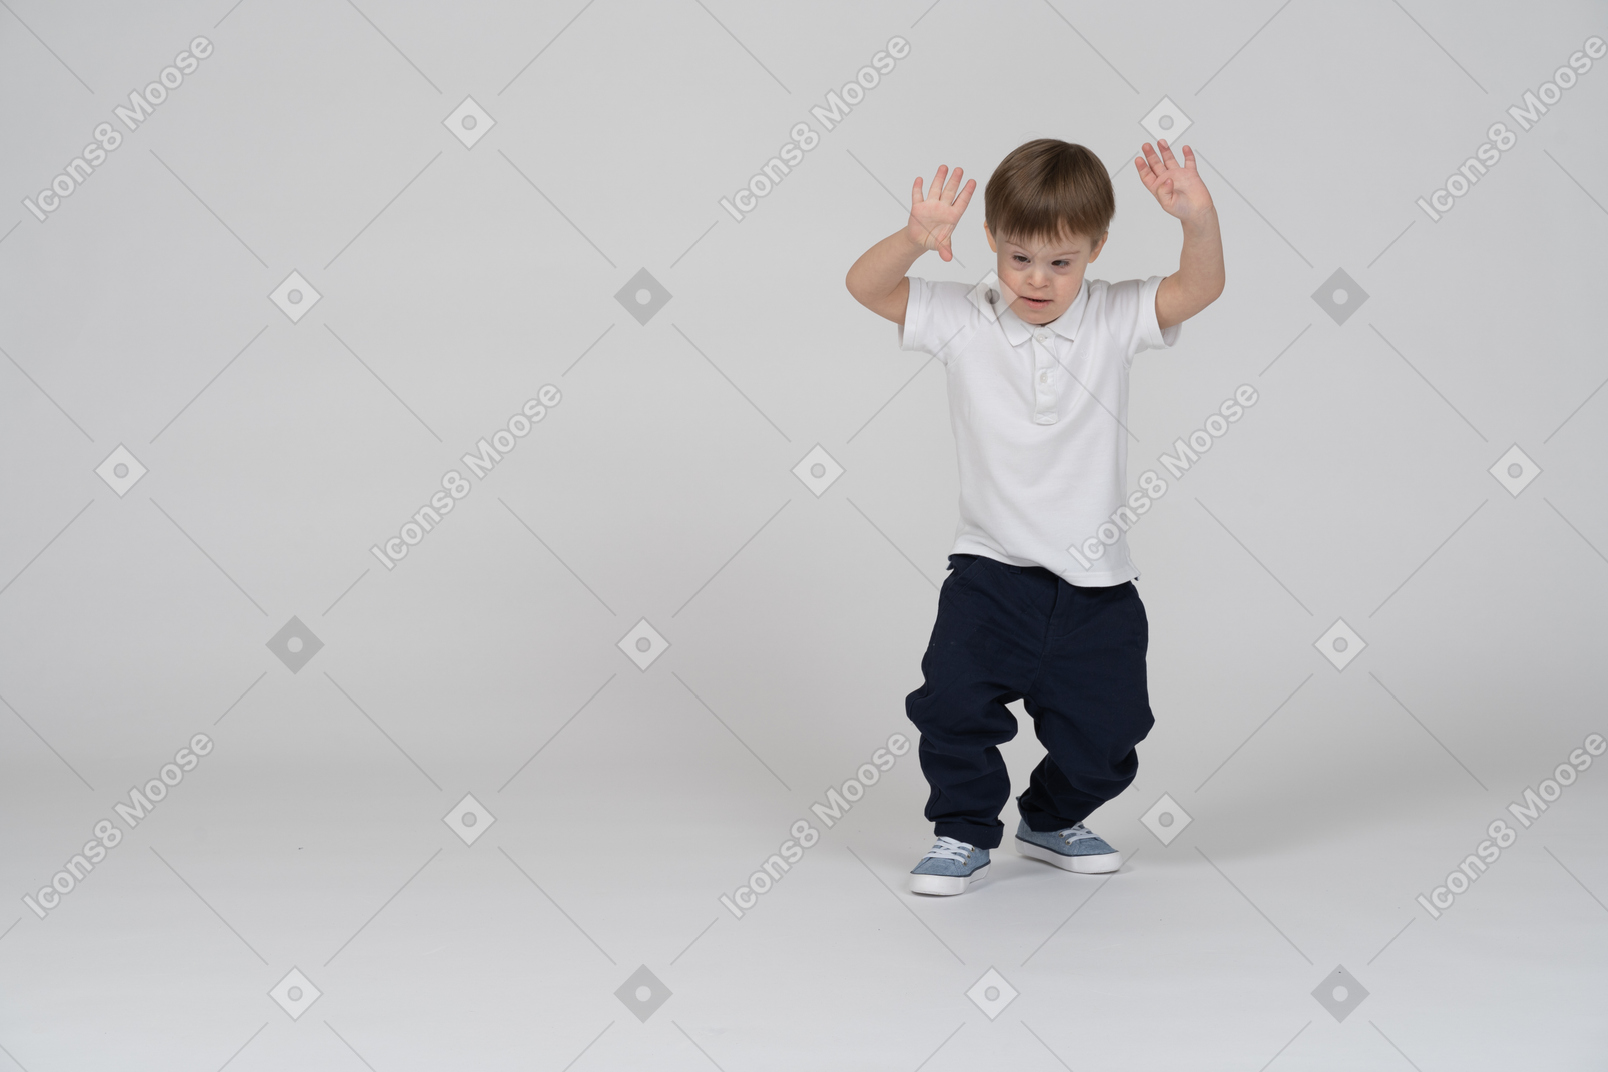 Front view of a boy squatting slightly with raised hands